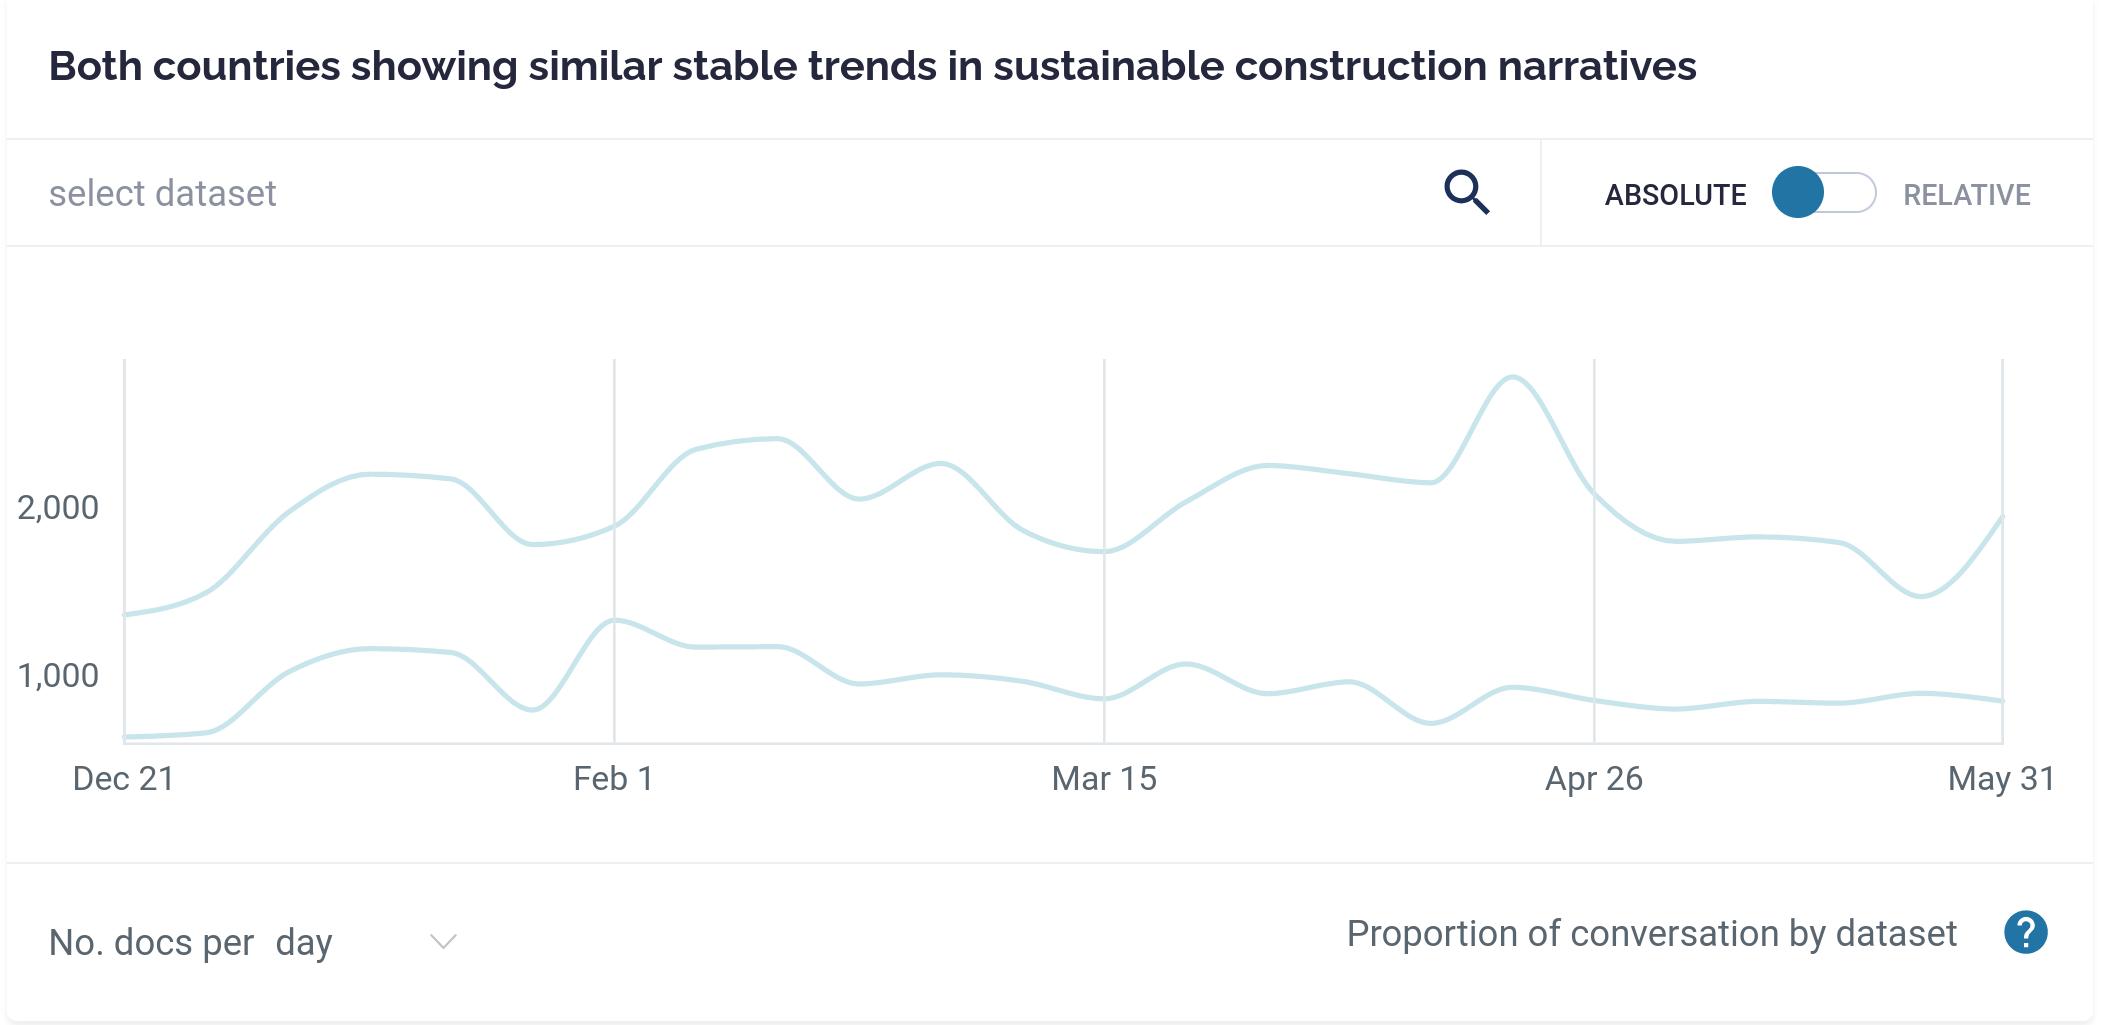 Both countries showing similar stable trends in sustainable construction narratives